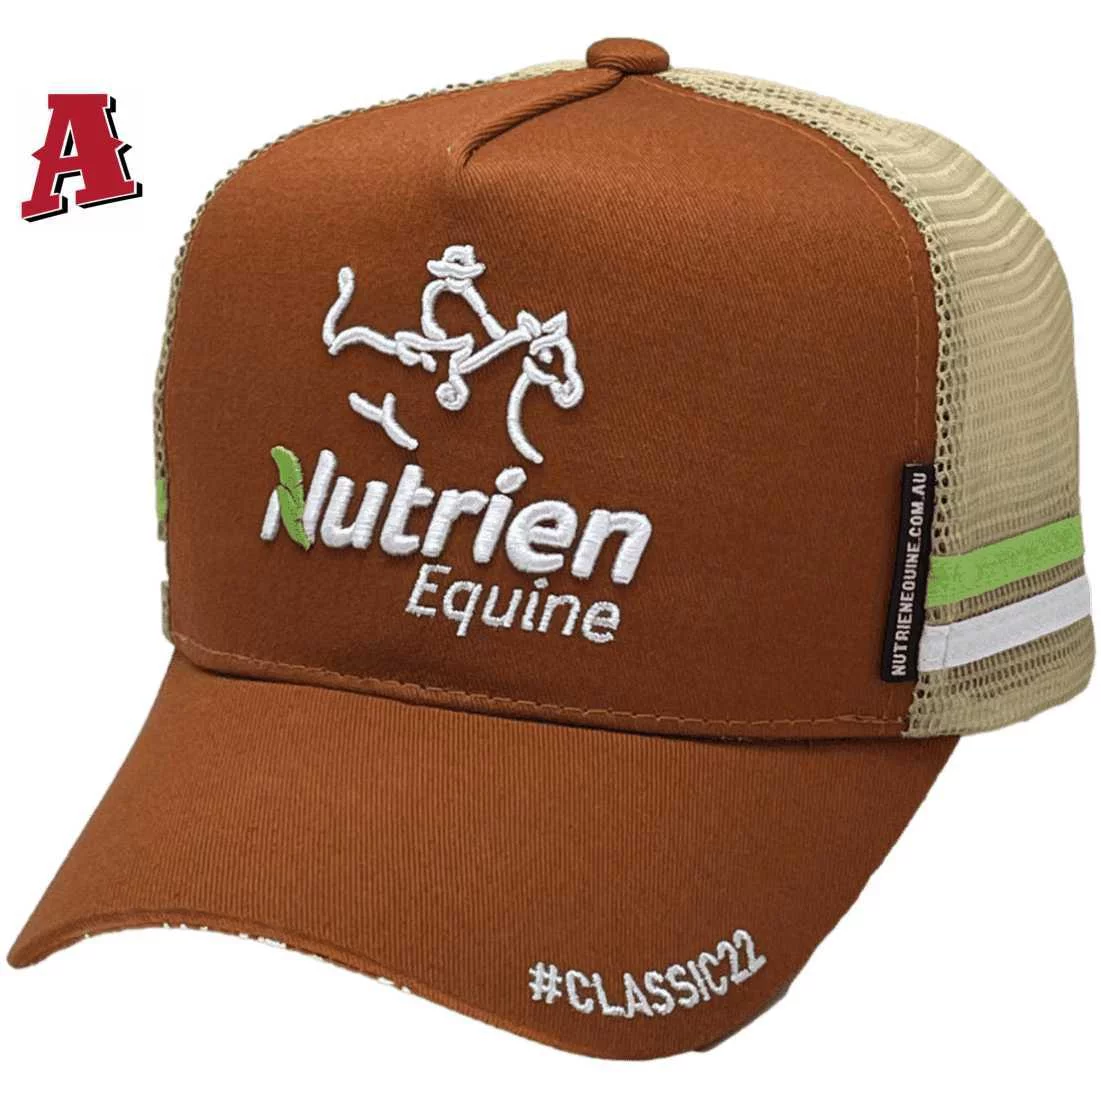 Nutrien Equine Classic Tamworth NSW HP Midrange Aussie Trucker Hat with Australian Head Fit Crown and Double Side Bands -Rust Khaki Lime White